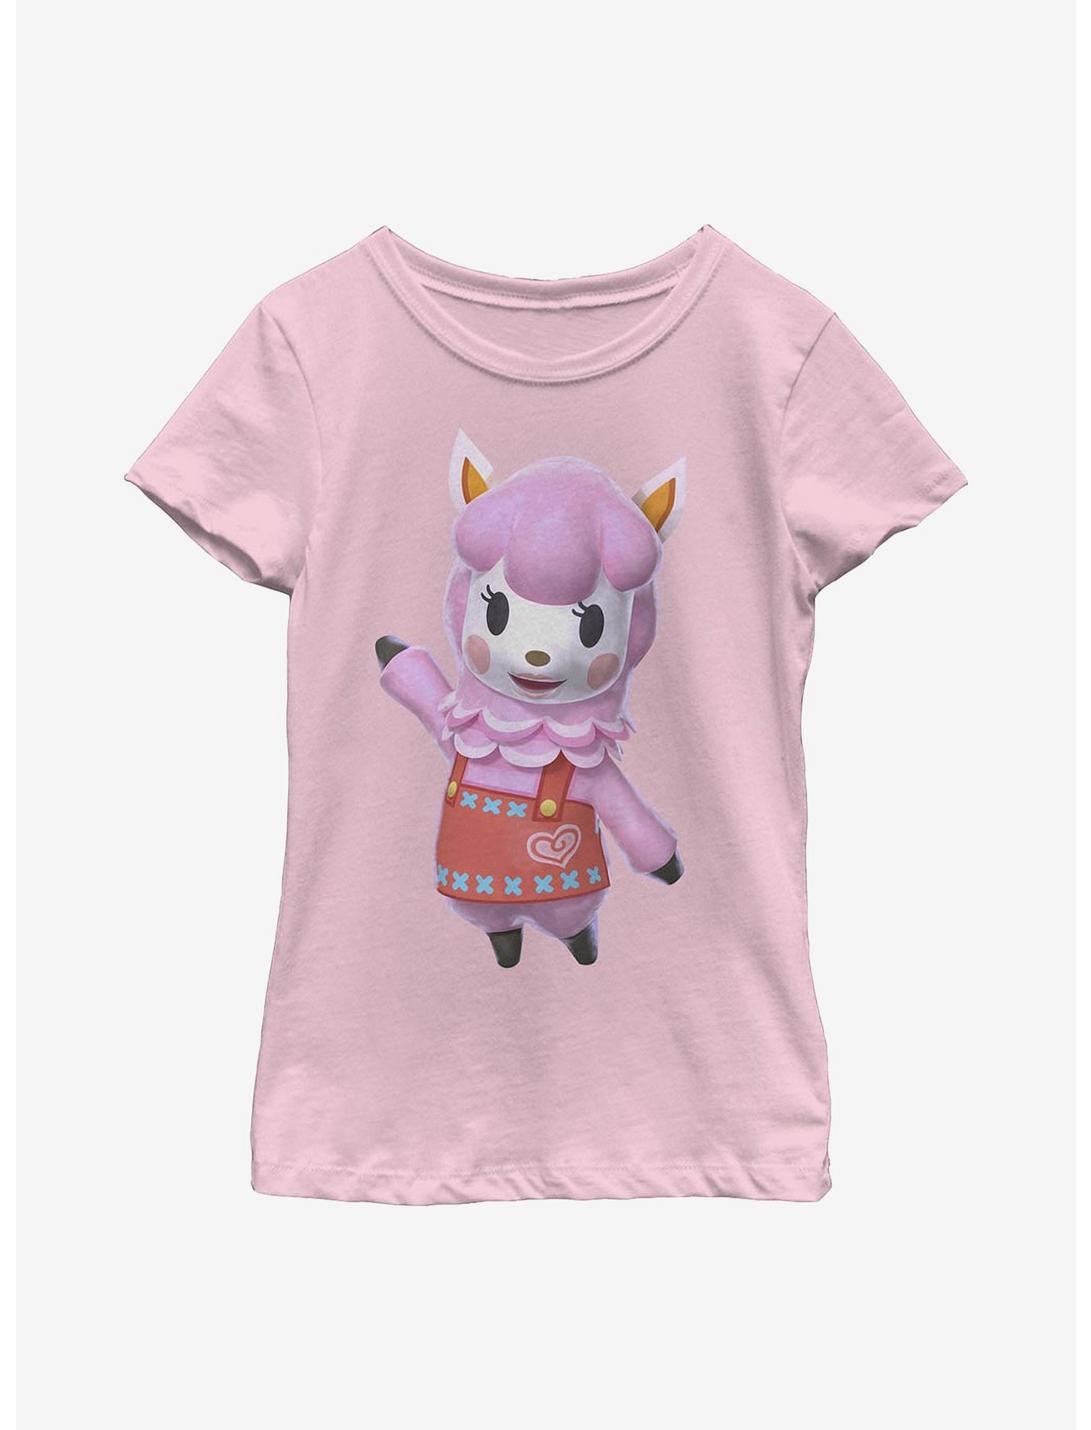 Animal Crossing Reese Pose Youth Girls T-Shirt - PINK | BoxLunch